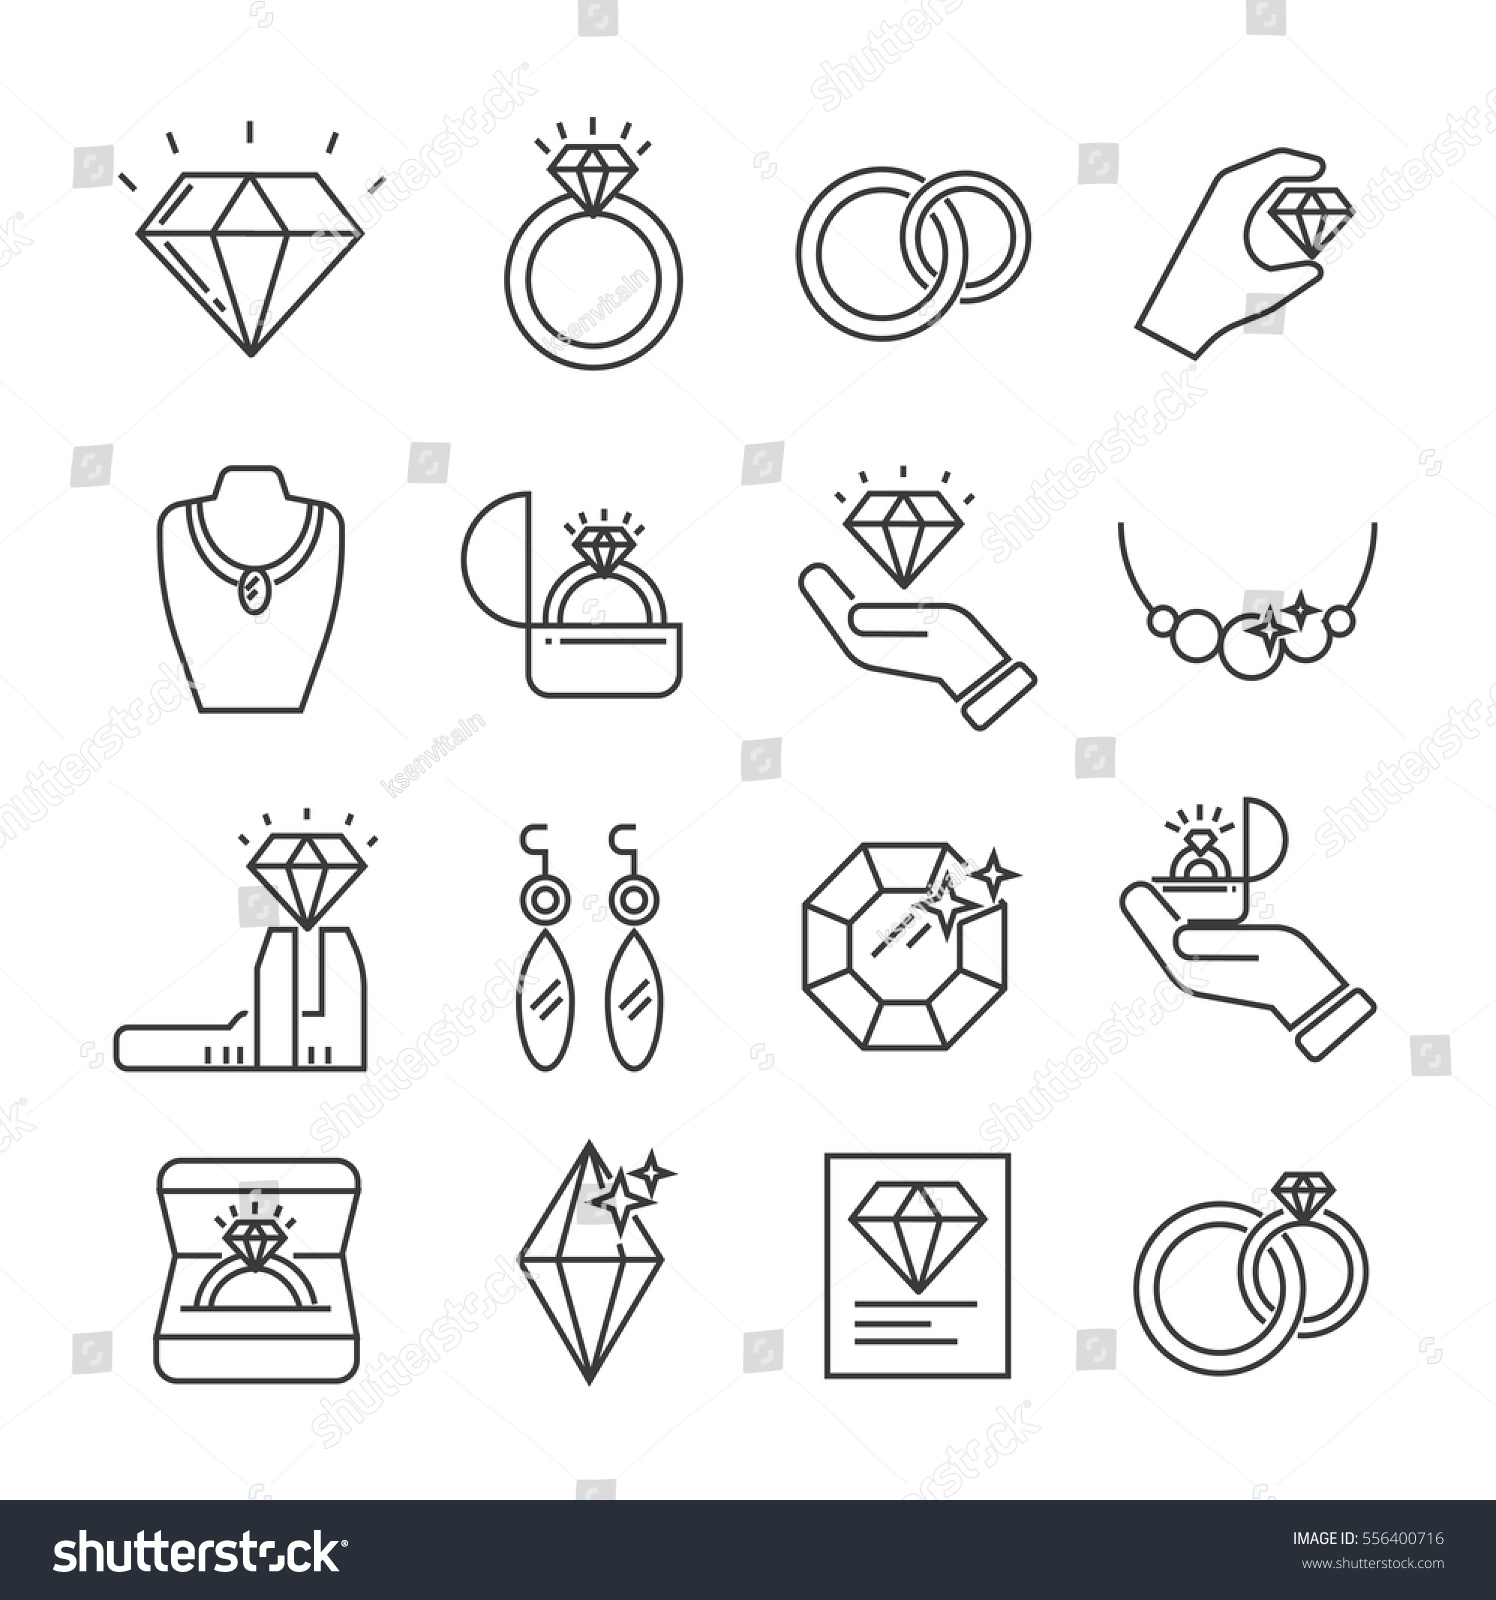 Set of jewelry Related Vector Line Icons. Includes such Icons as diamond, ring, wedding ring, bracelet, earrings, necklace, jeweler, jewel #556400716